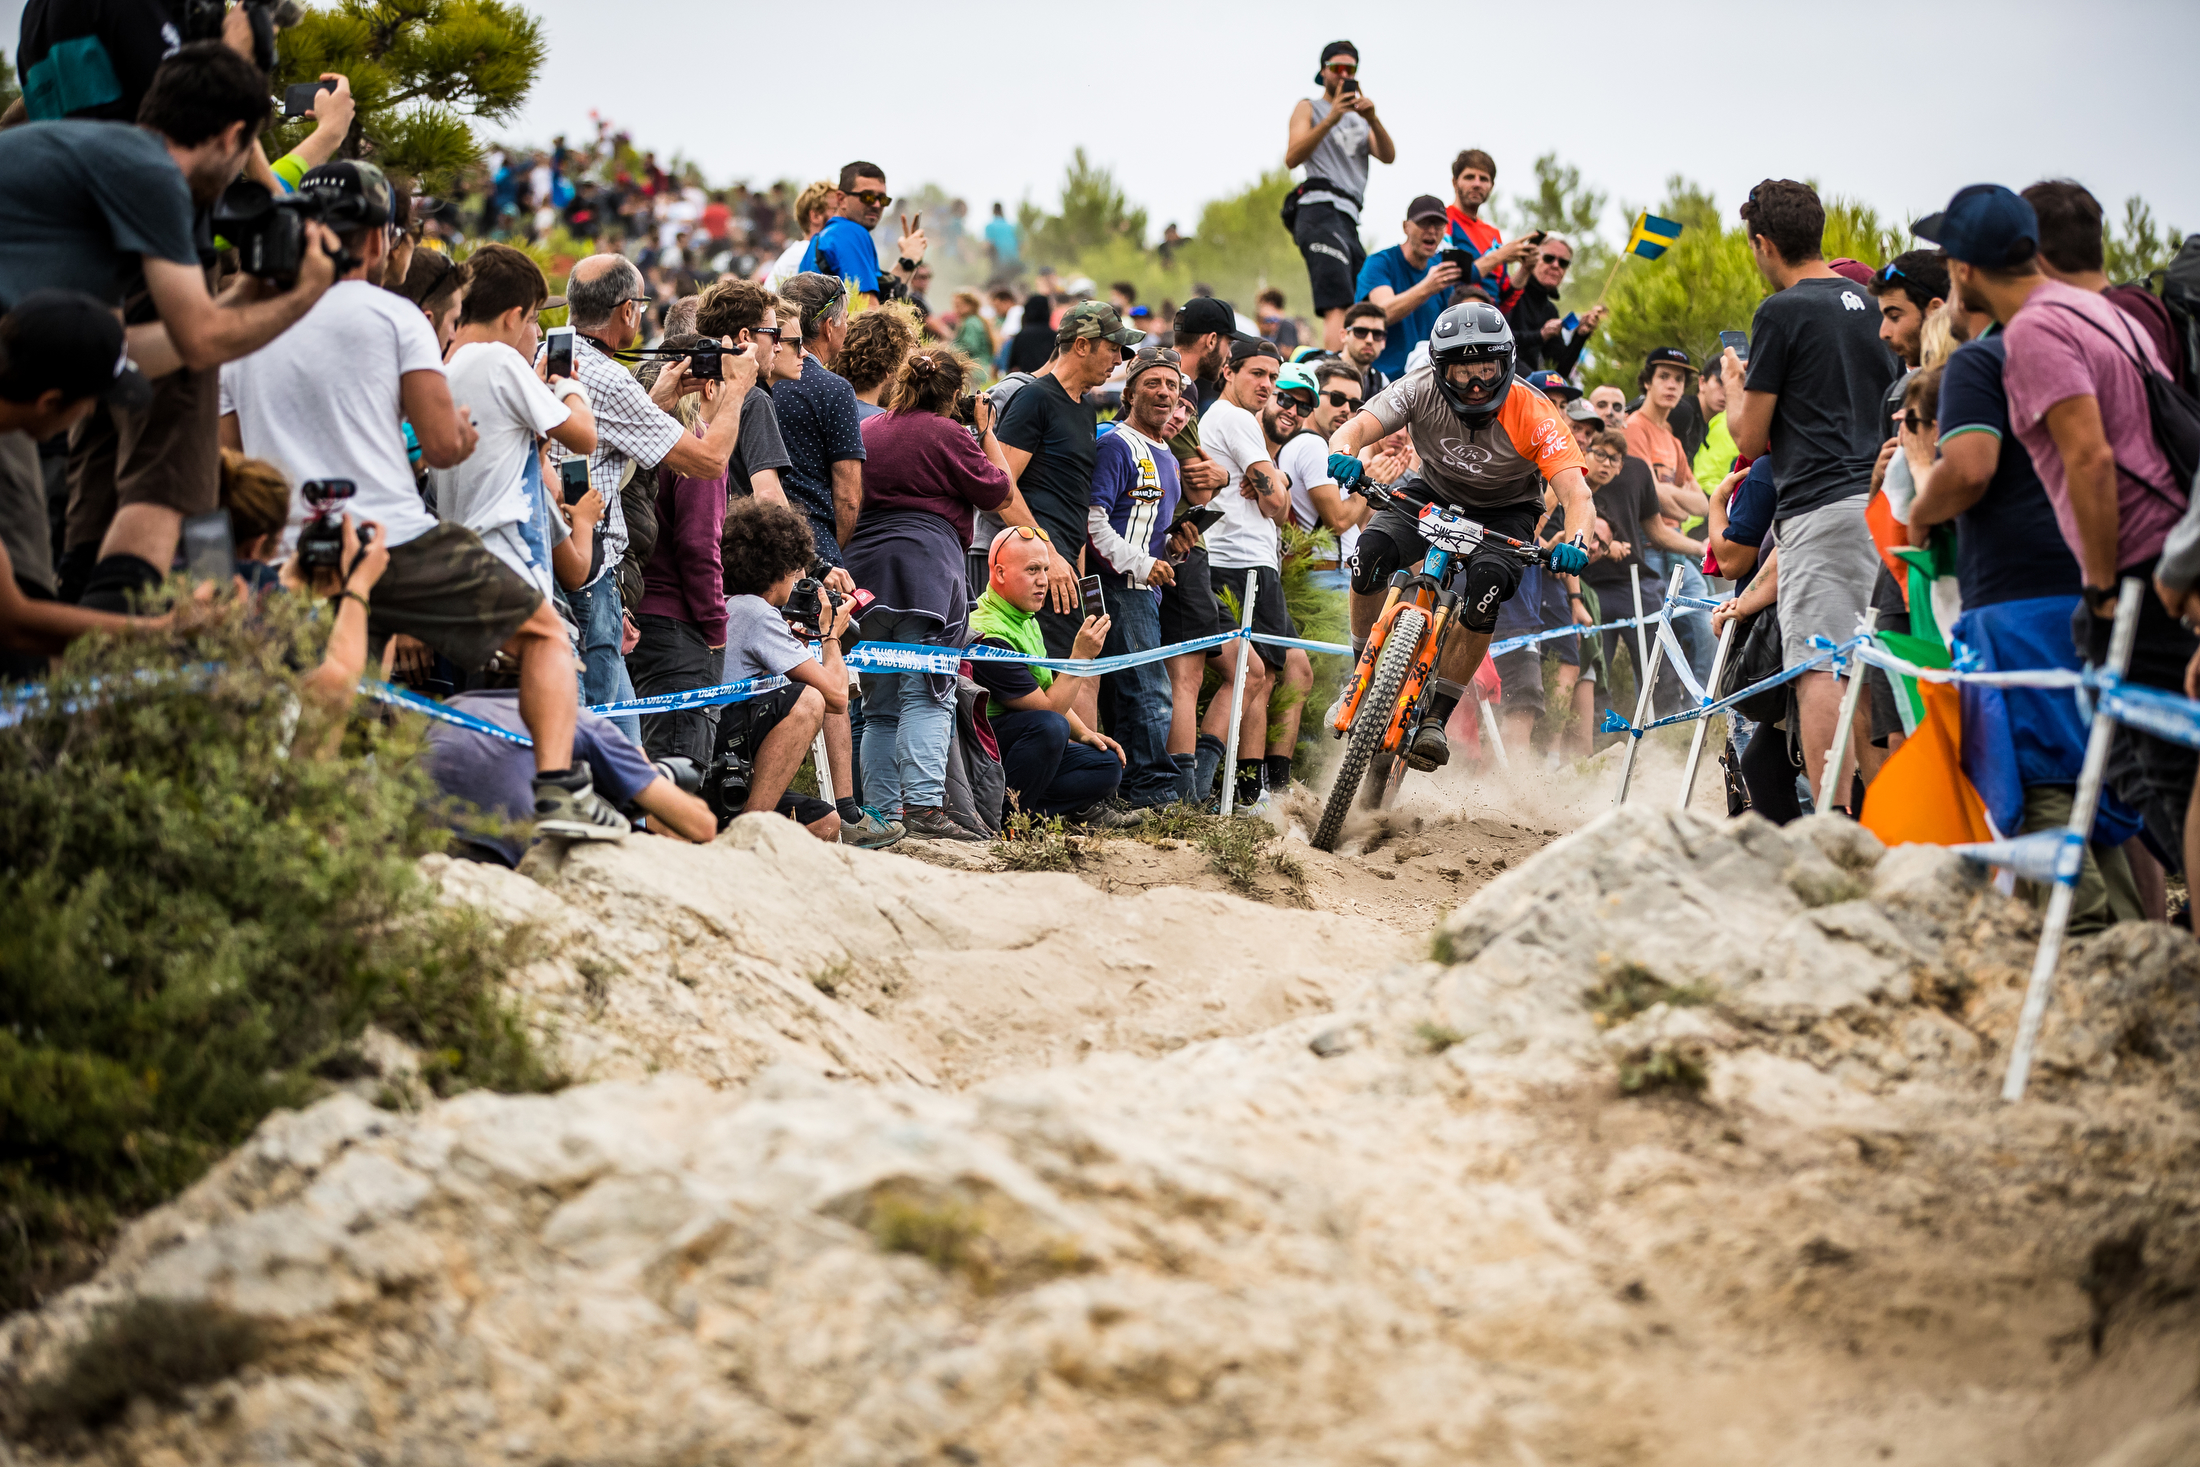 Robin Wallner smashes through the loose dirt in a spectator section